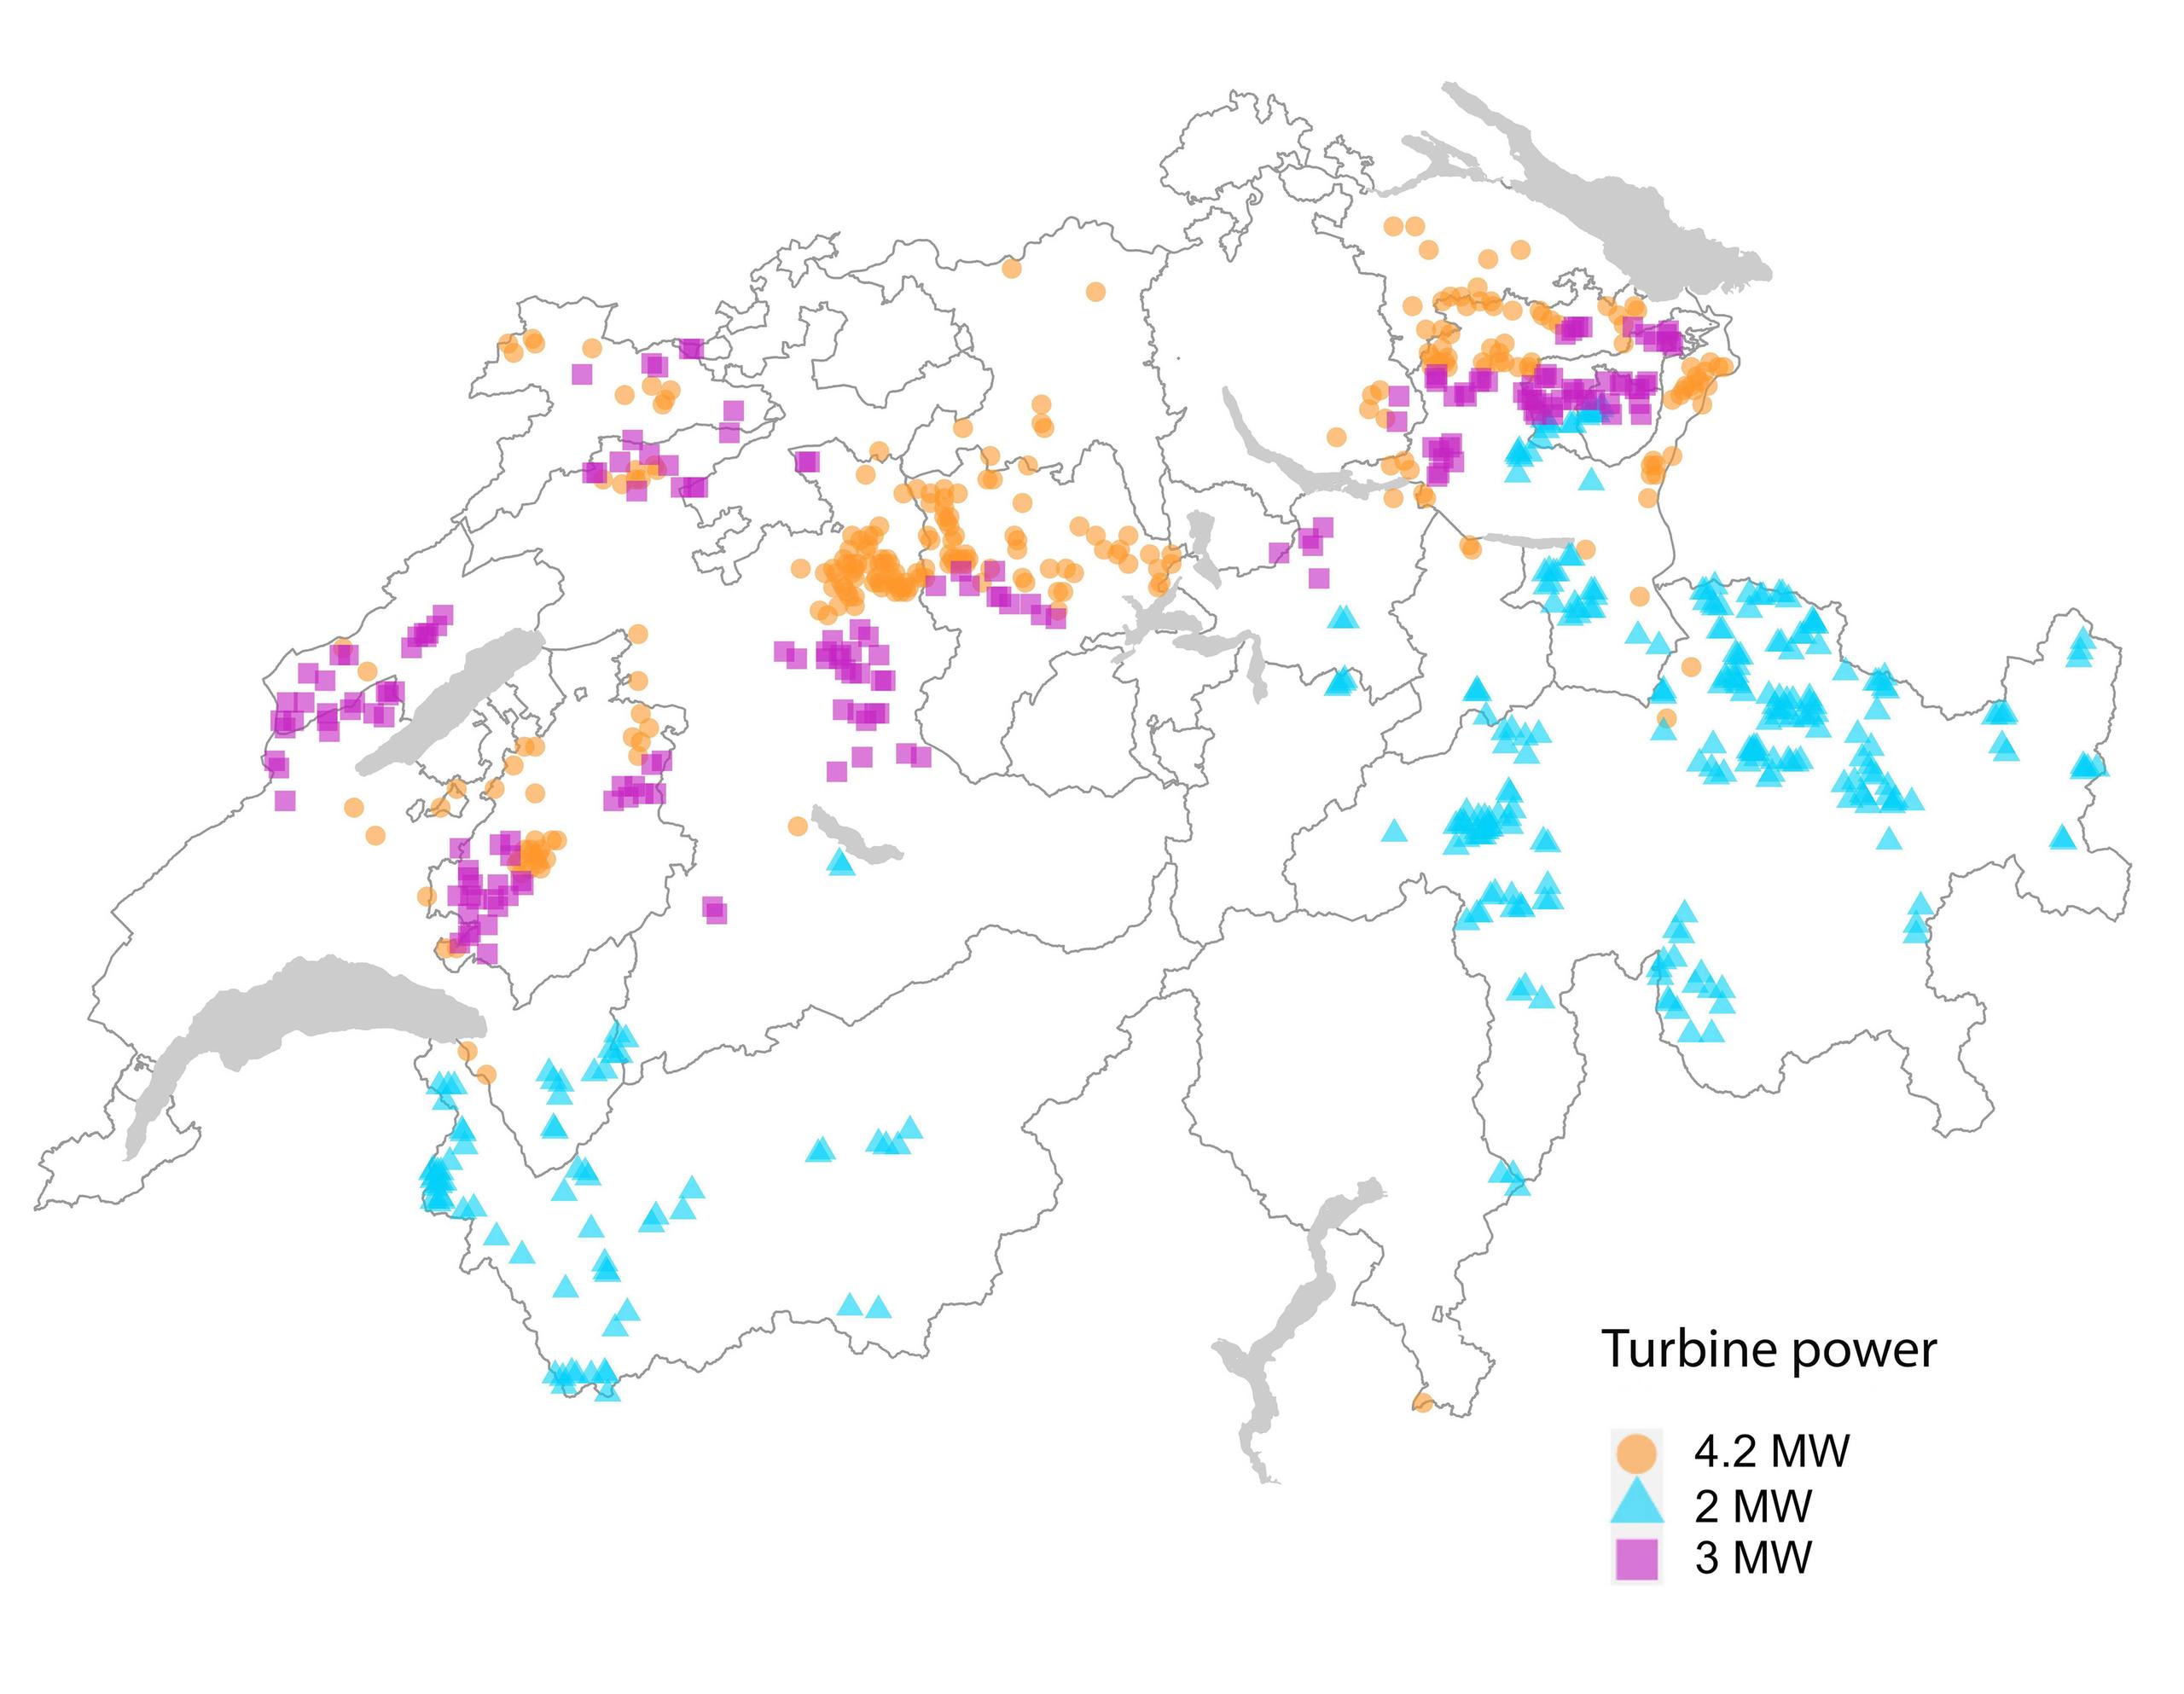 Map of Switzerland showing where wind turbines could be built